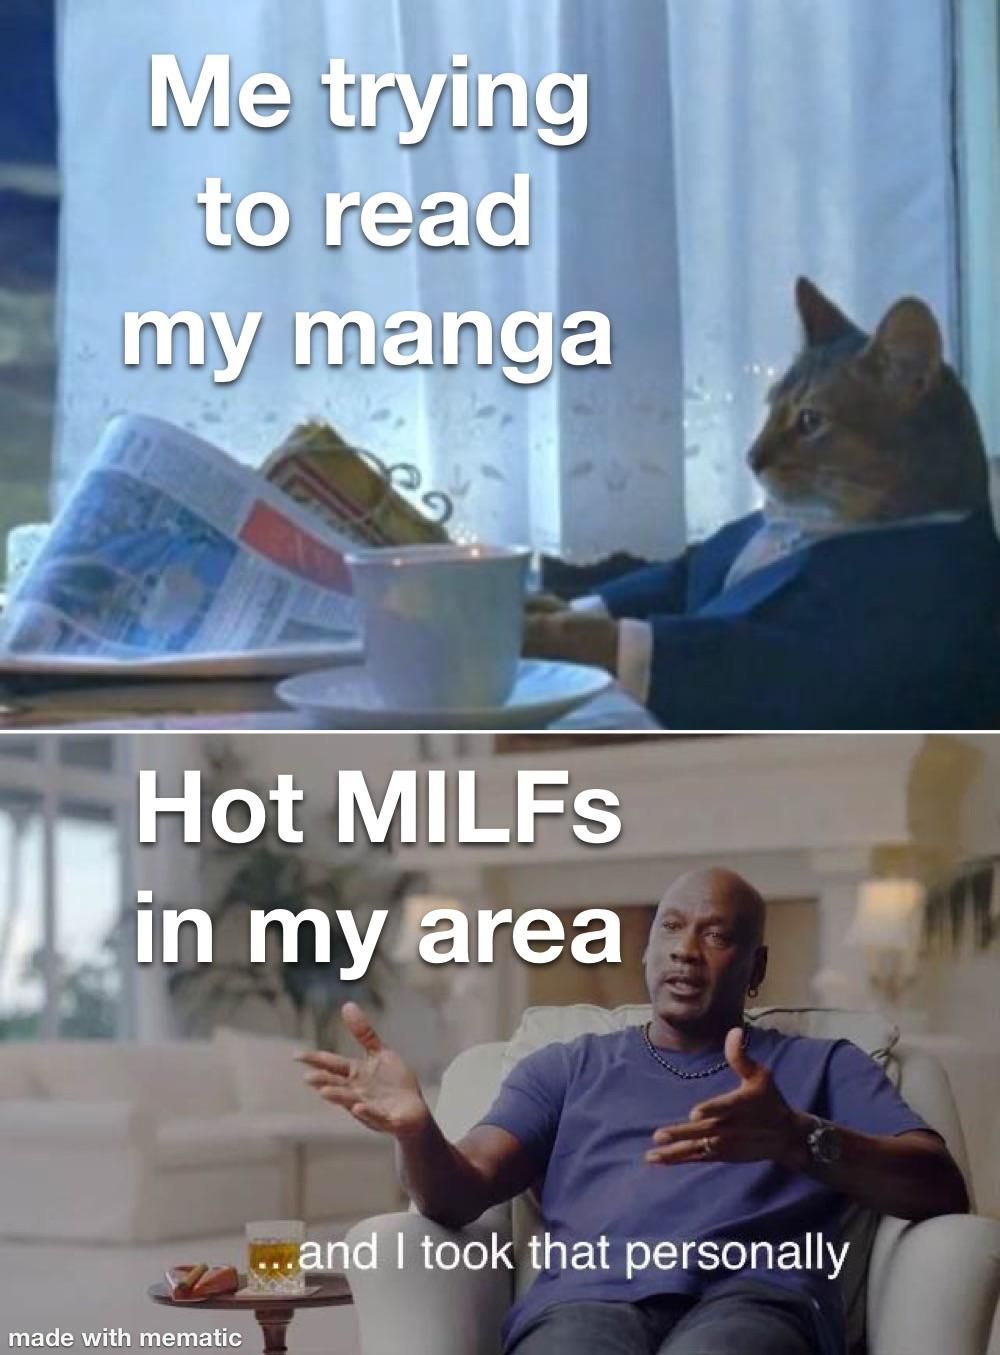 Let me read in peace